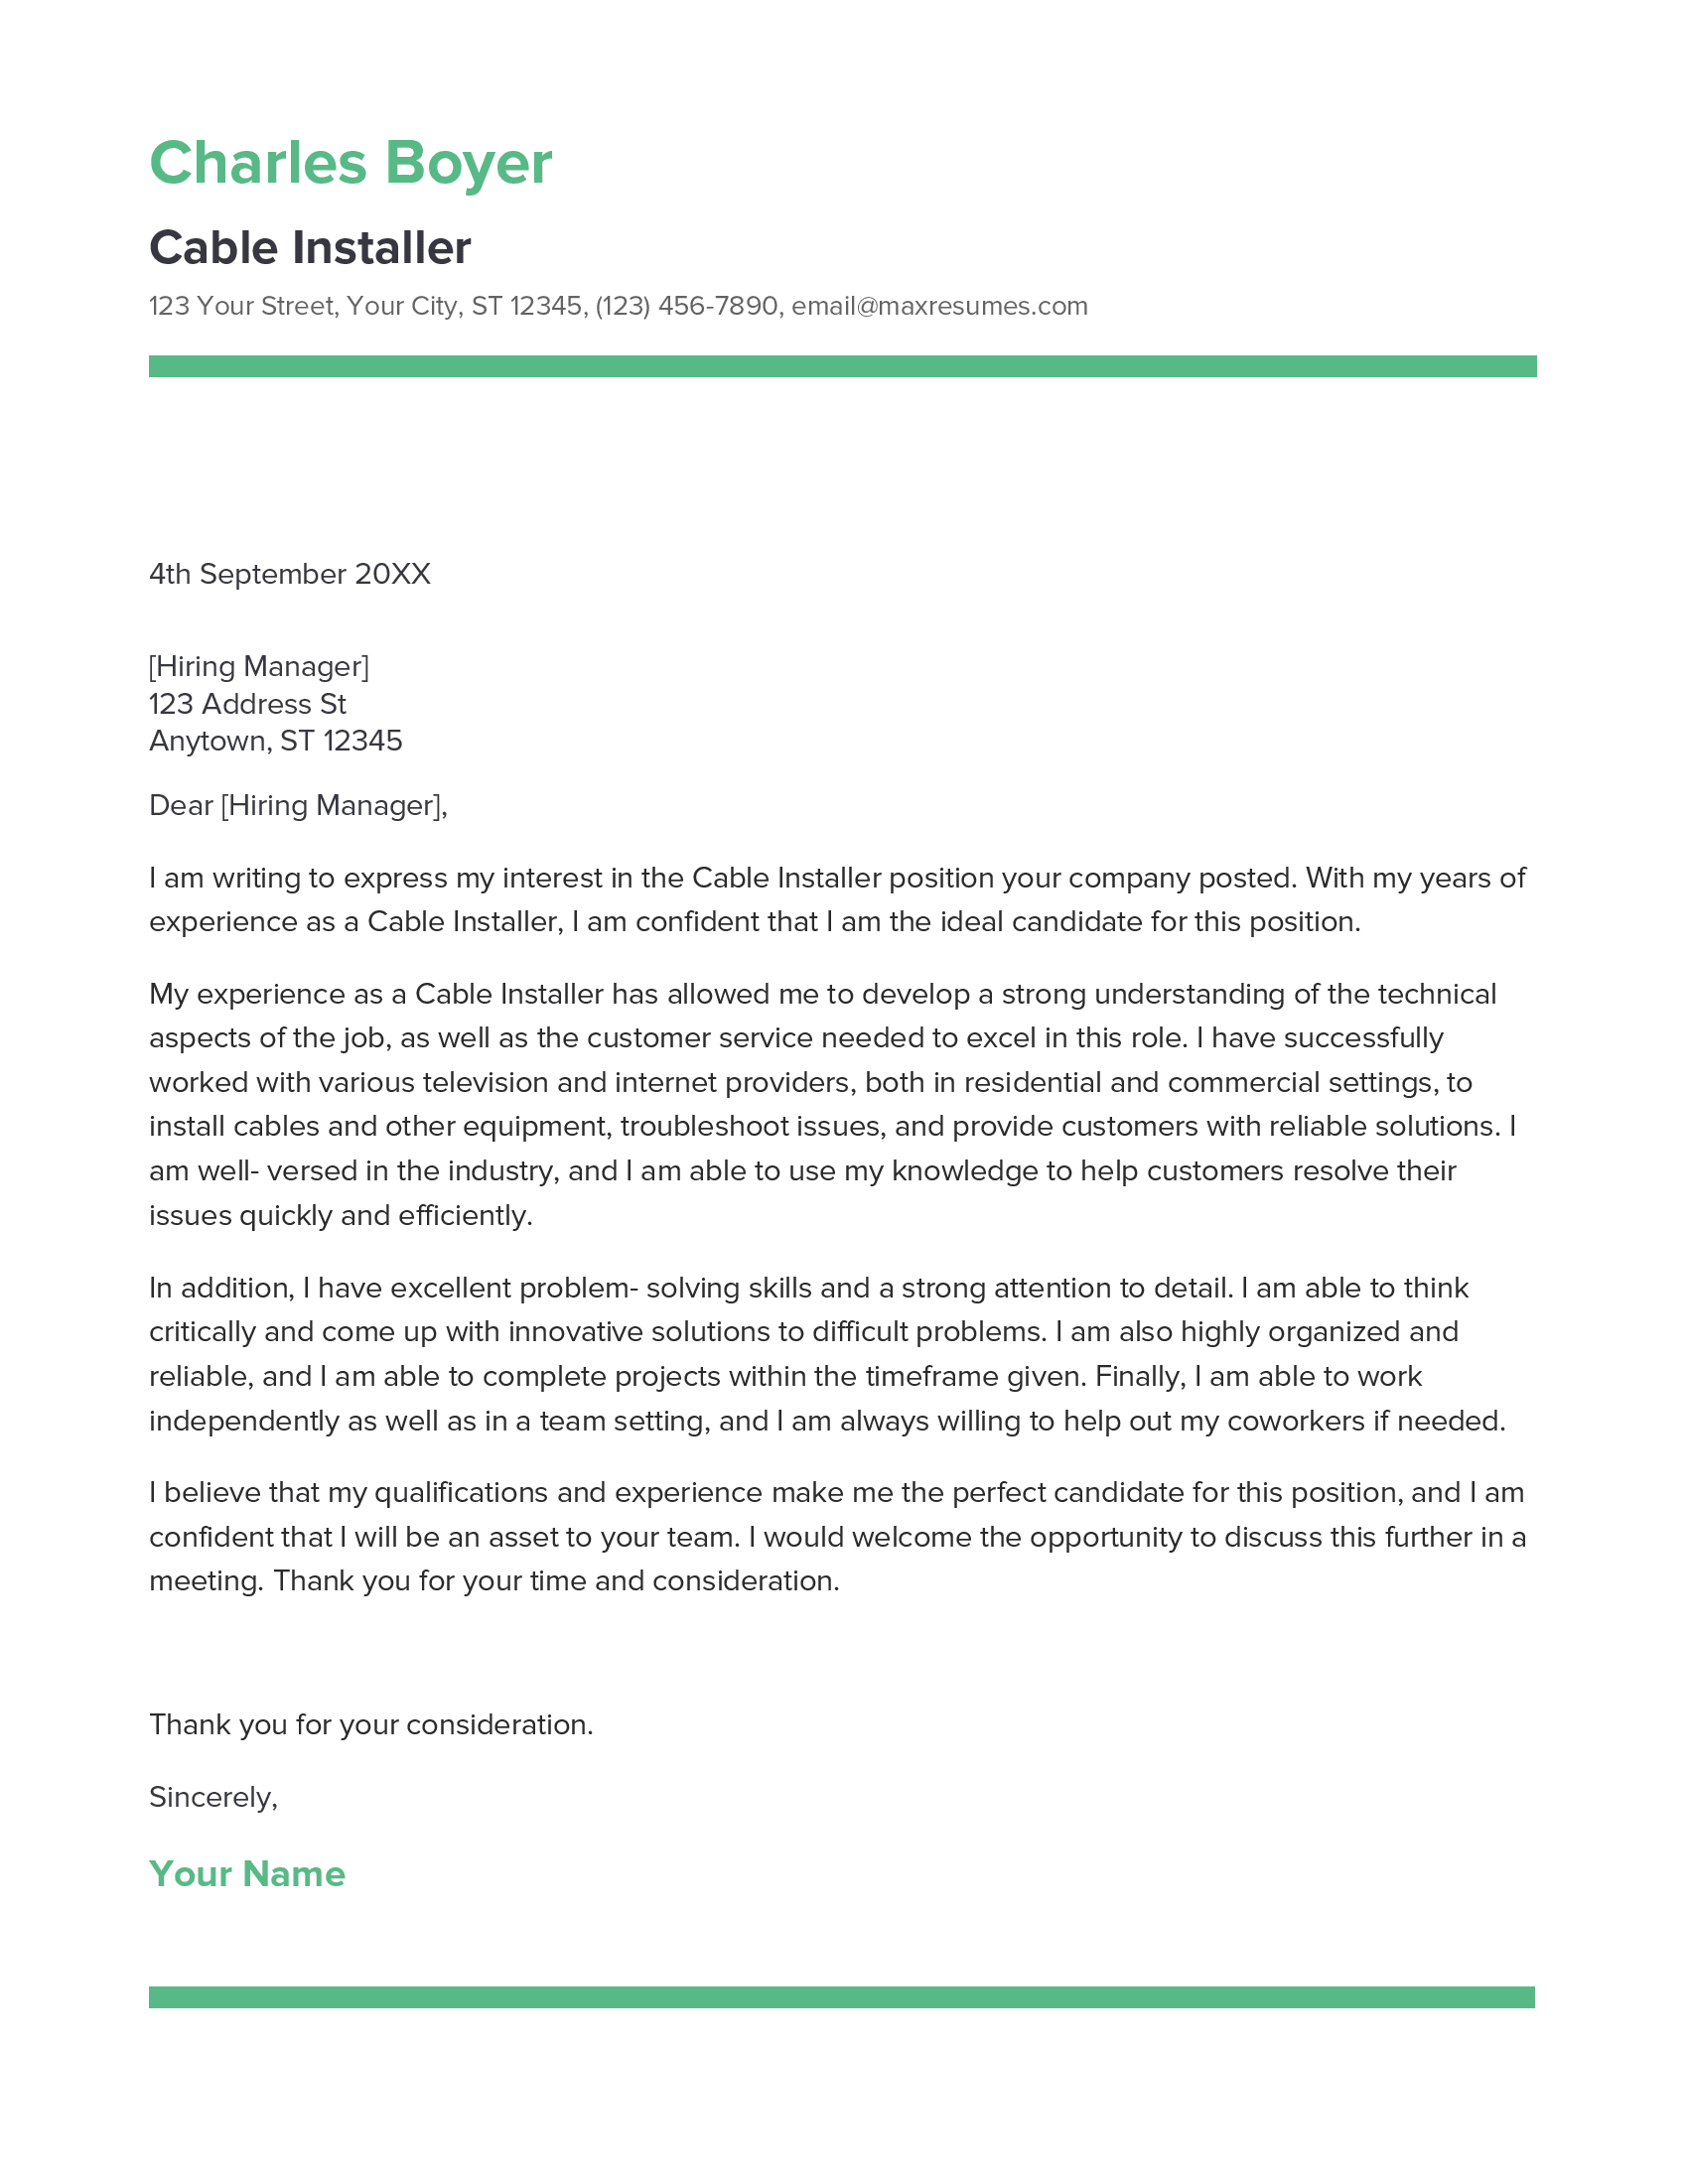 Cable Installer Cover Letter Example